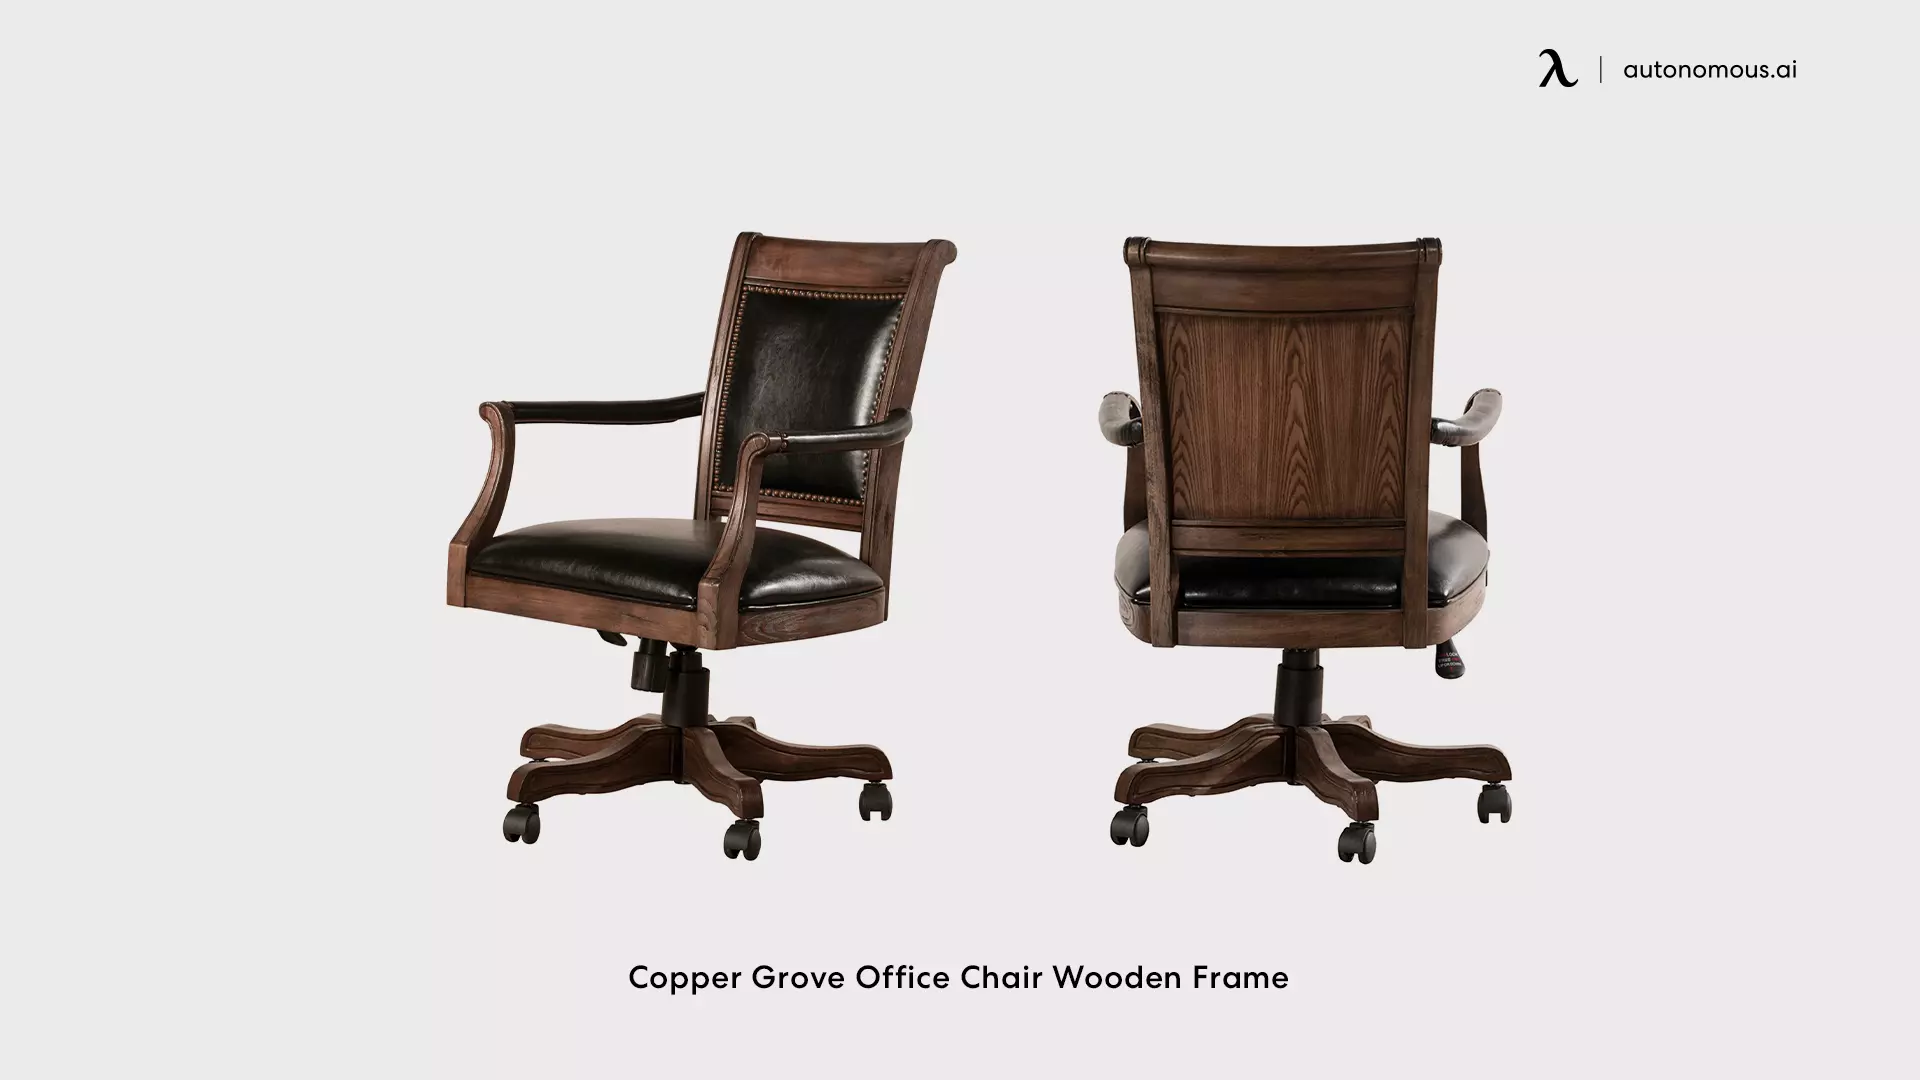 Copper Grove Office Chair